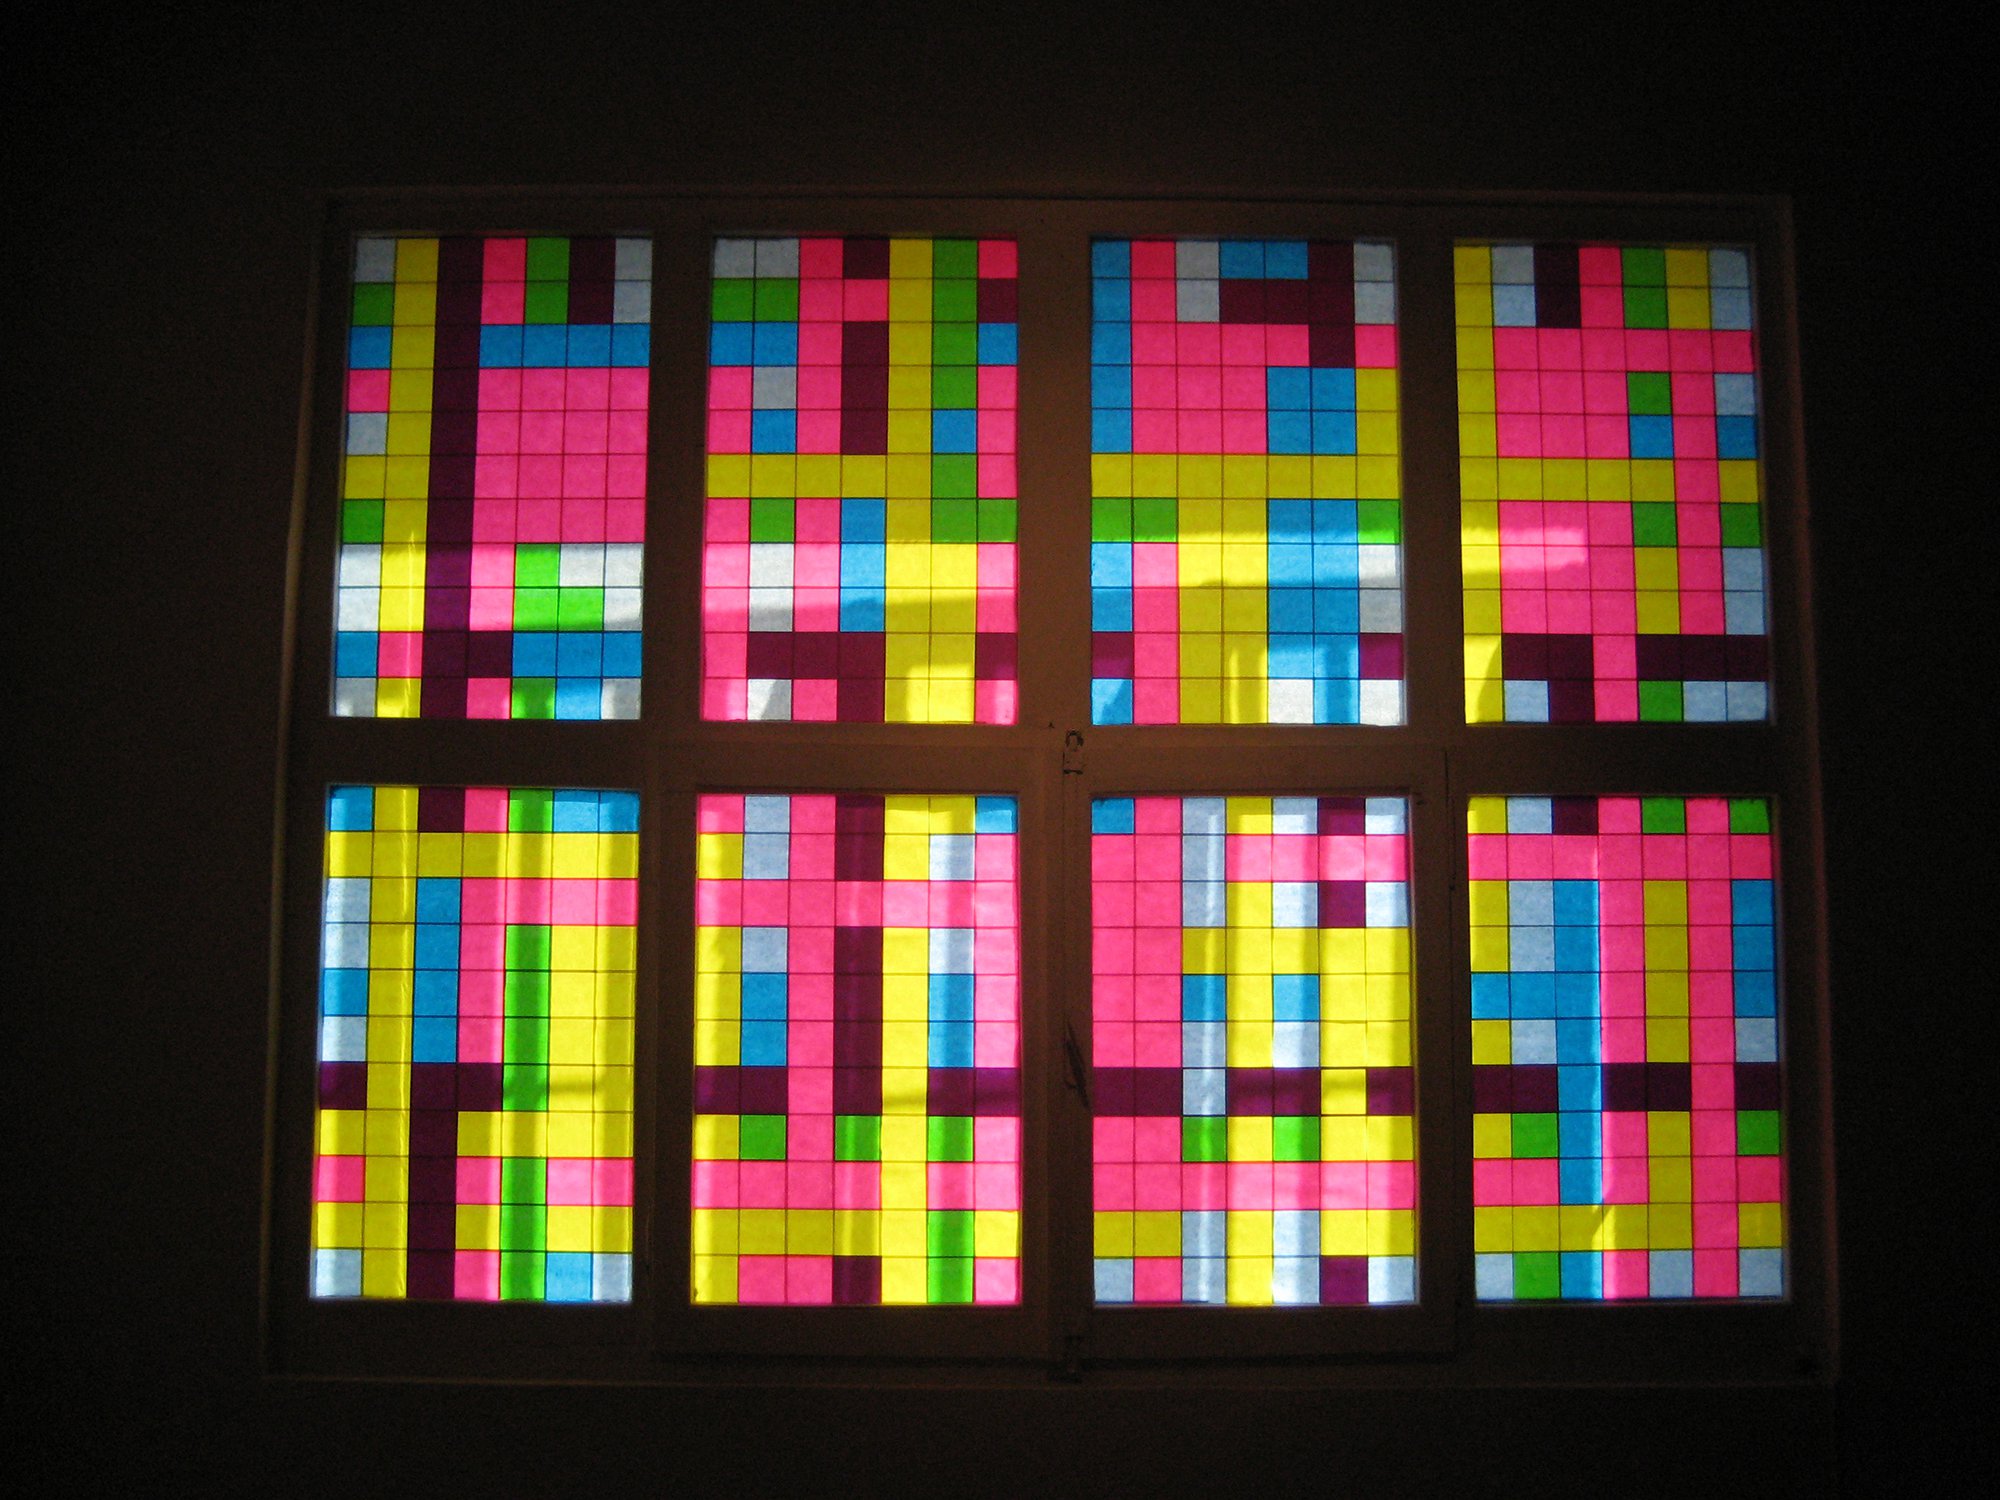 Eftihis Patsourakis, Lightnotes, post-it notes and lightboxes, 2007. Installation view, This Then That, Rodeo, Istanbul, 2007